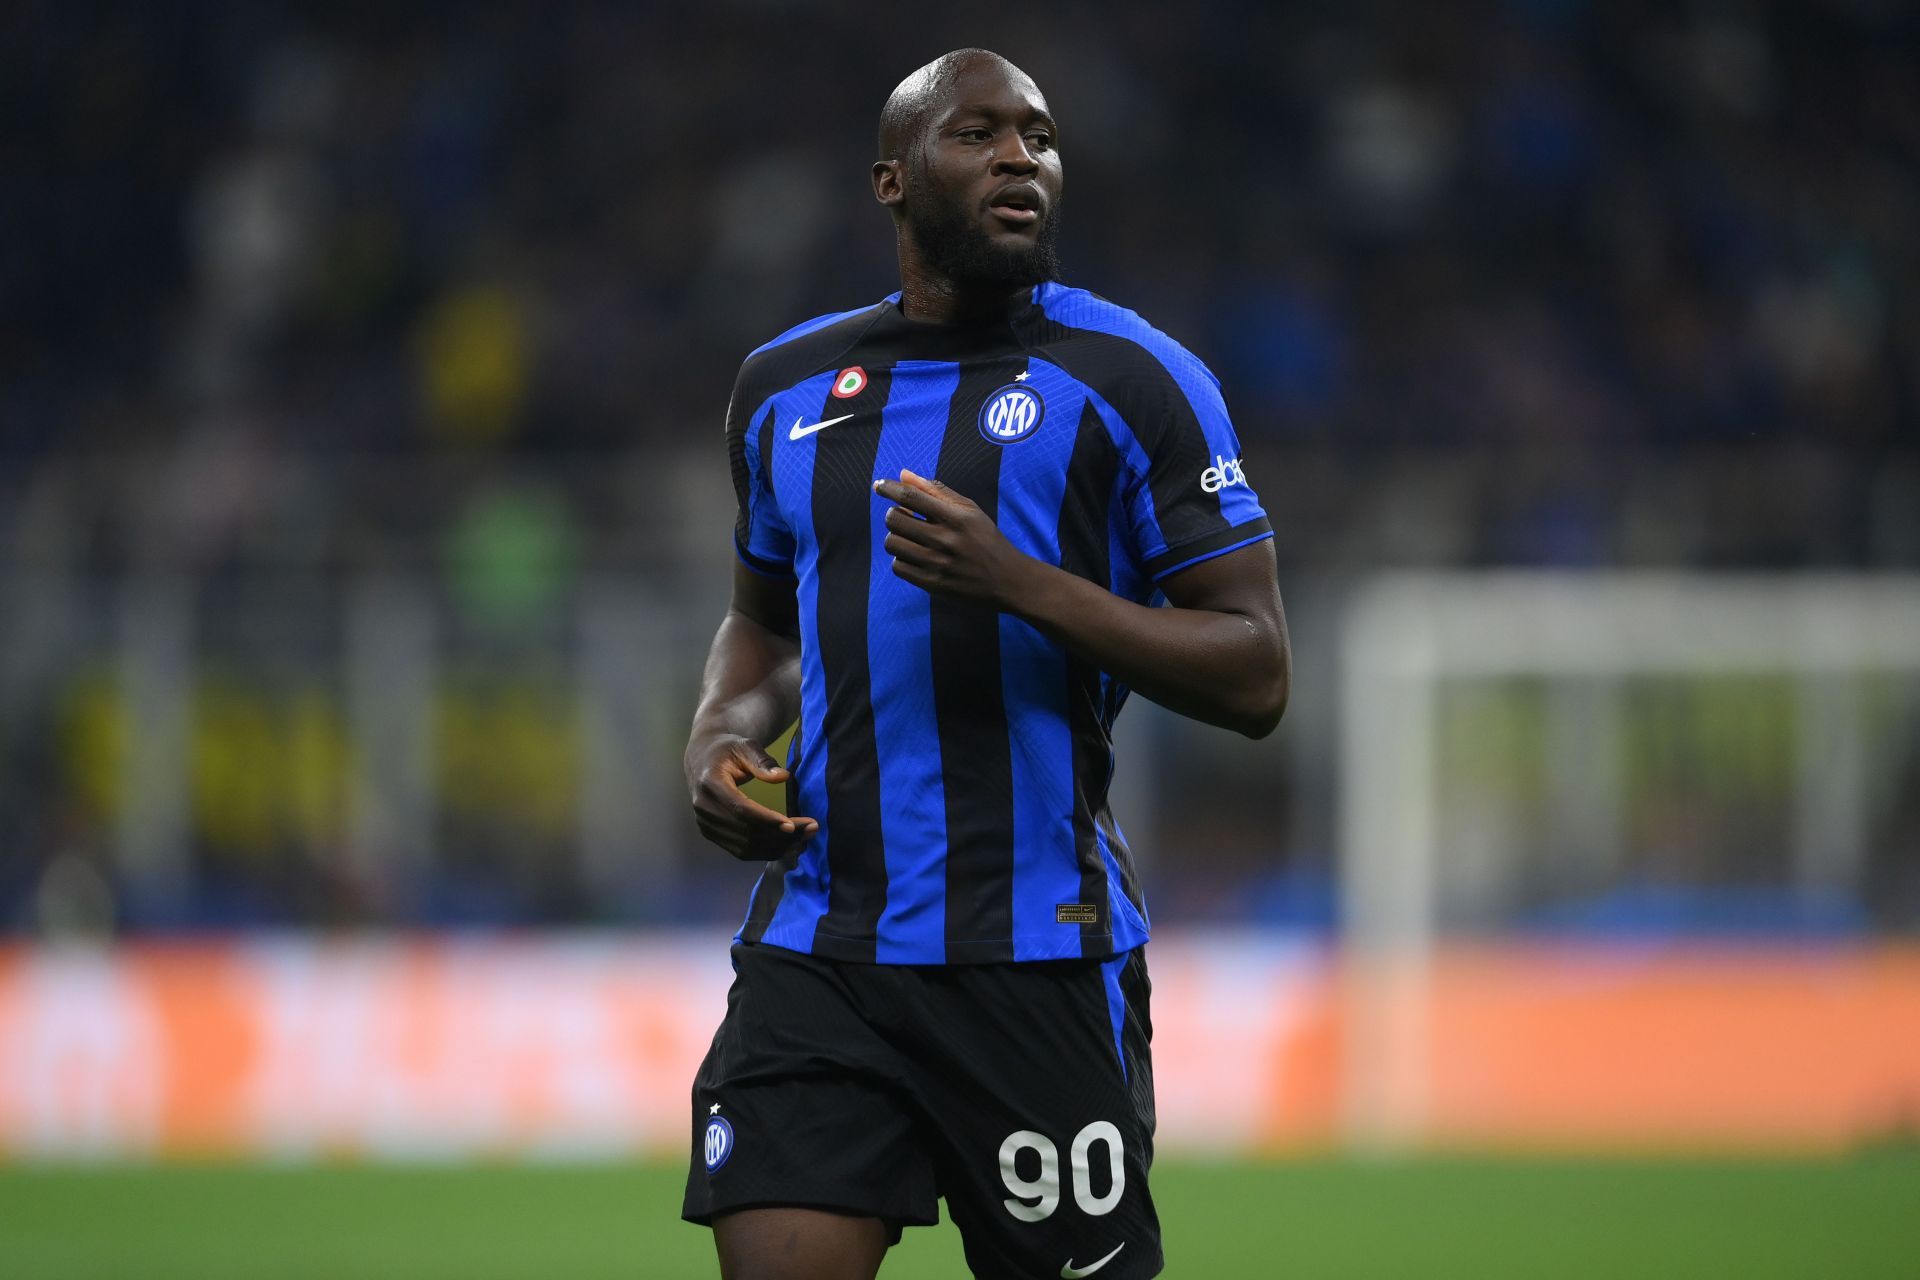 Romelu Lukaku believes Inter was always an option after a big-money move to Chelsea.